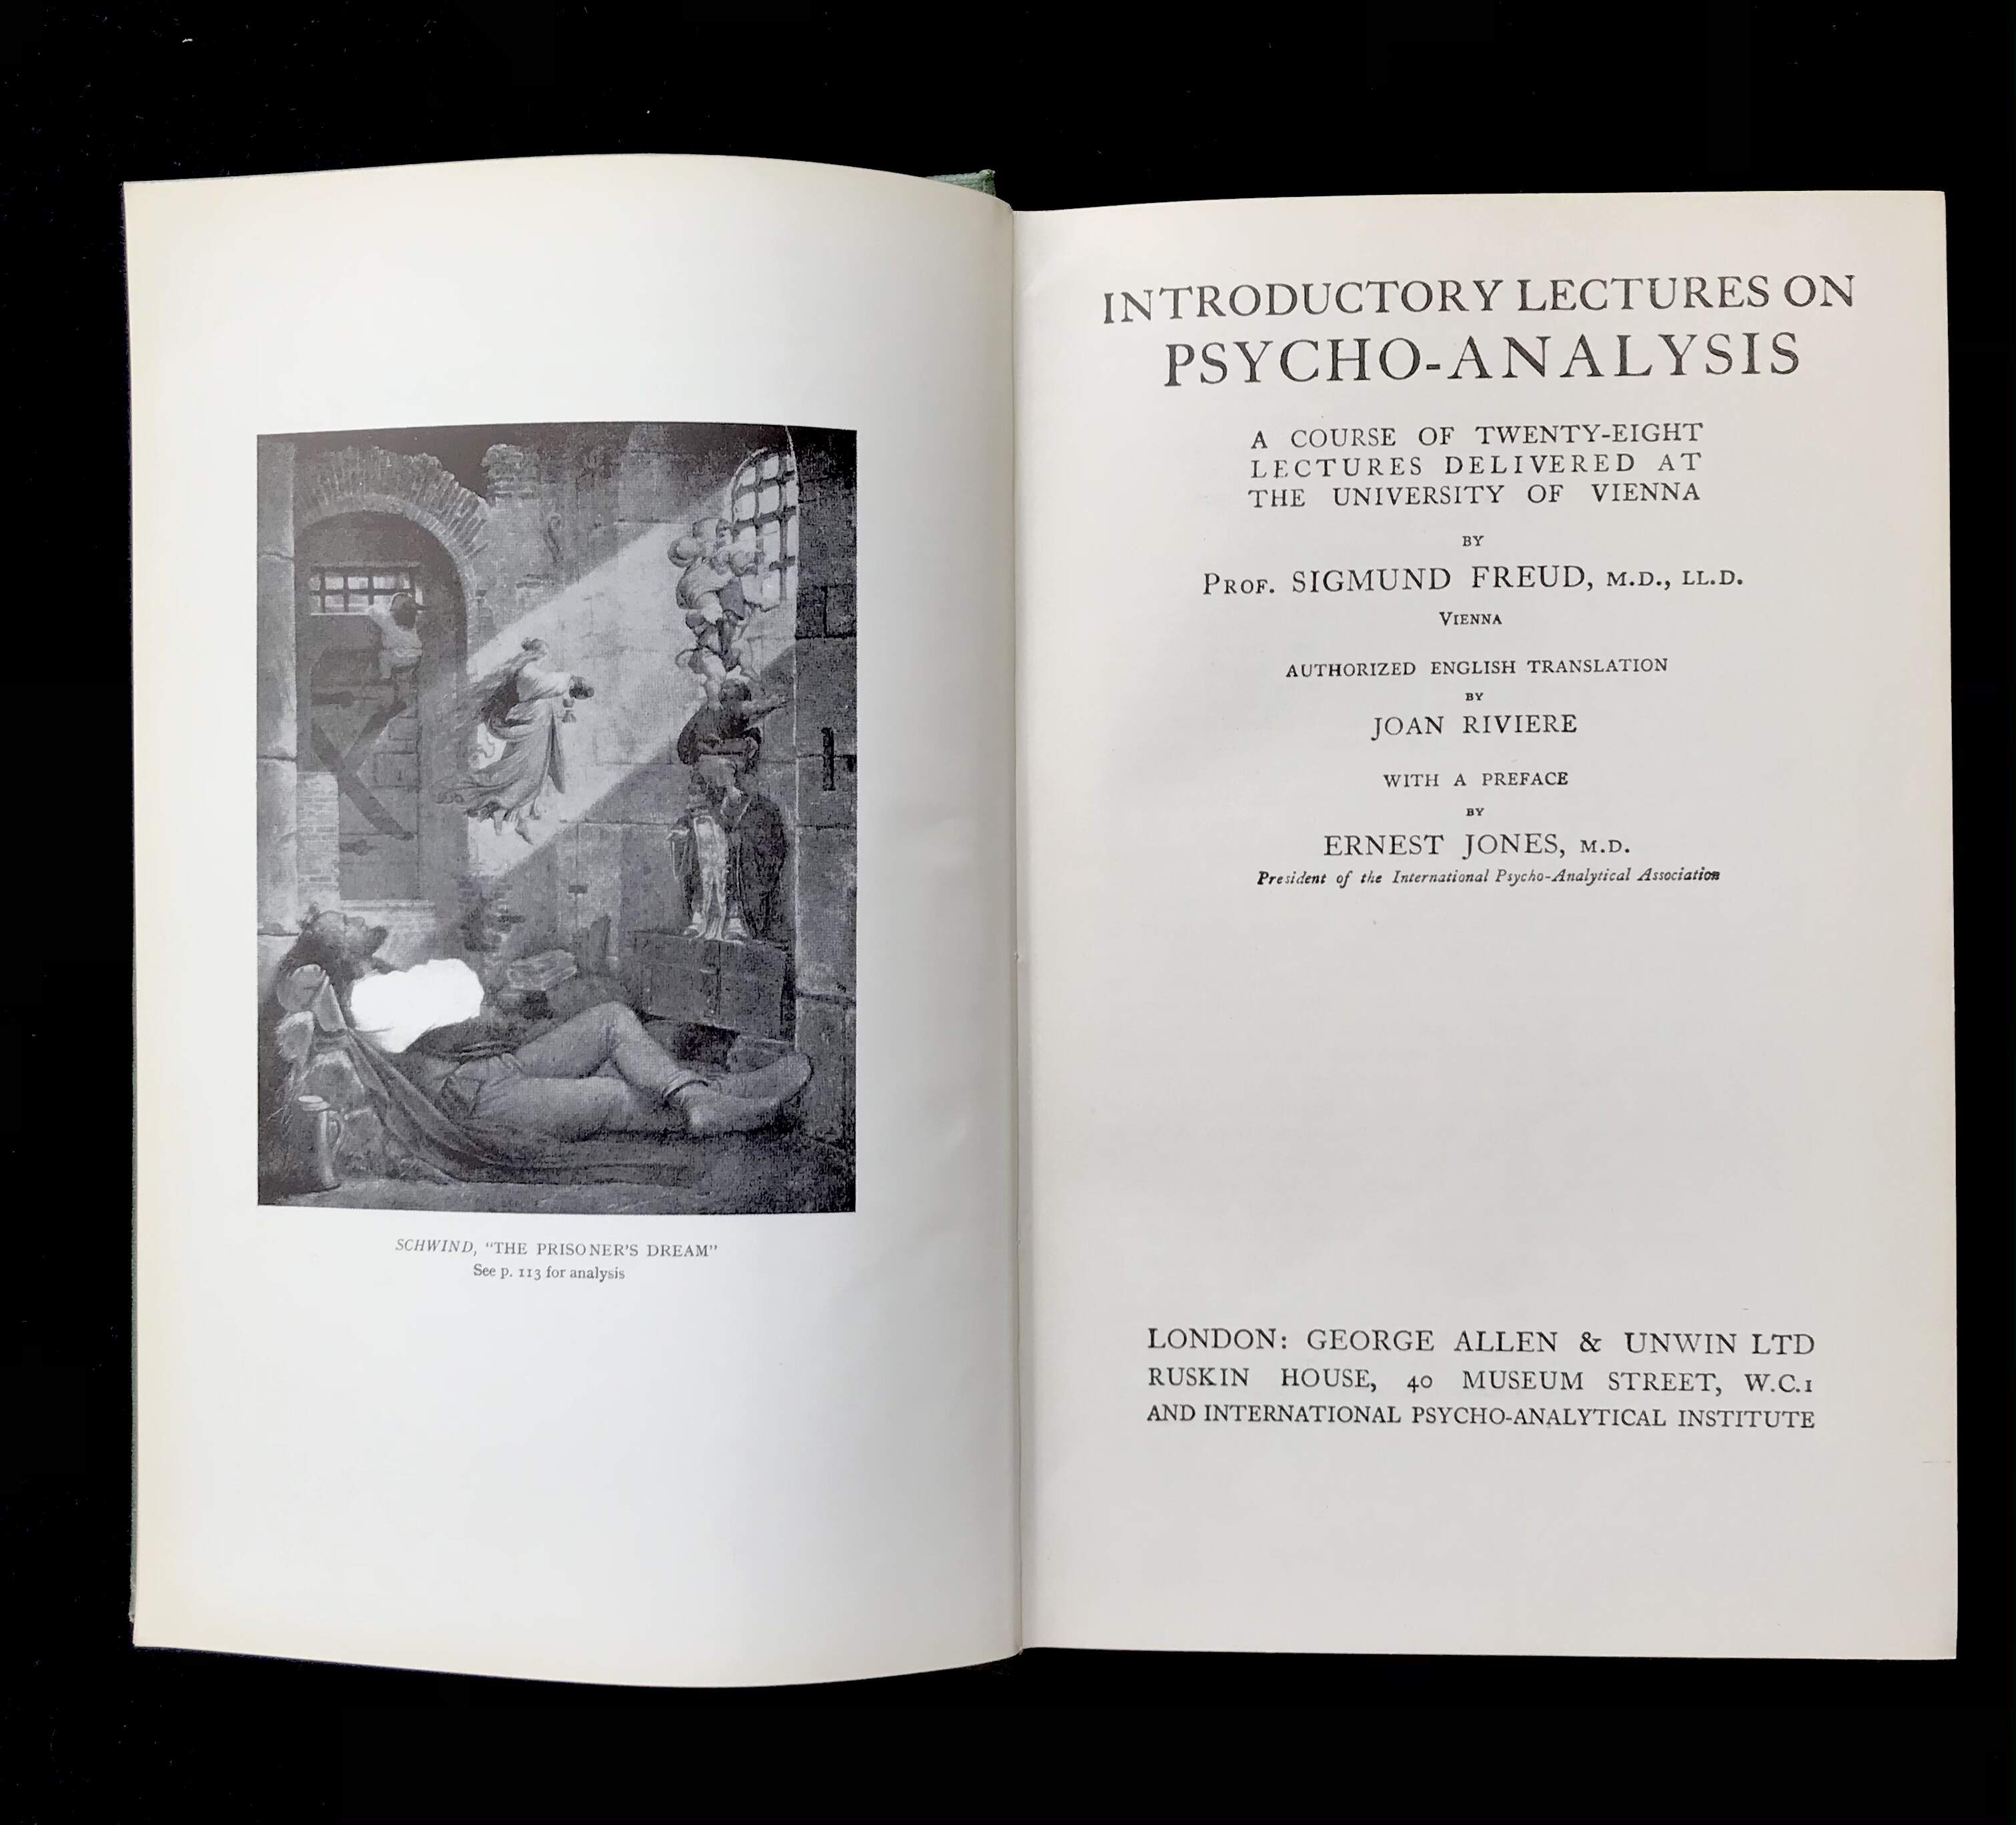 Introductory Lectures on Psycho-Analysis by Sigmund Freud